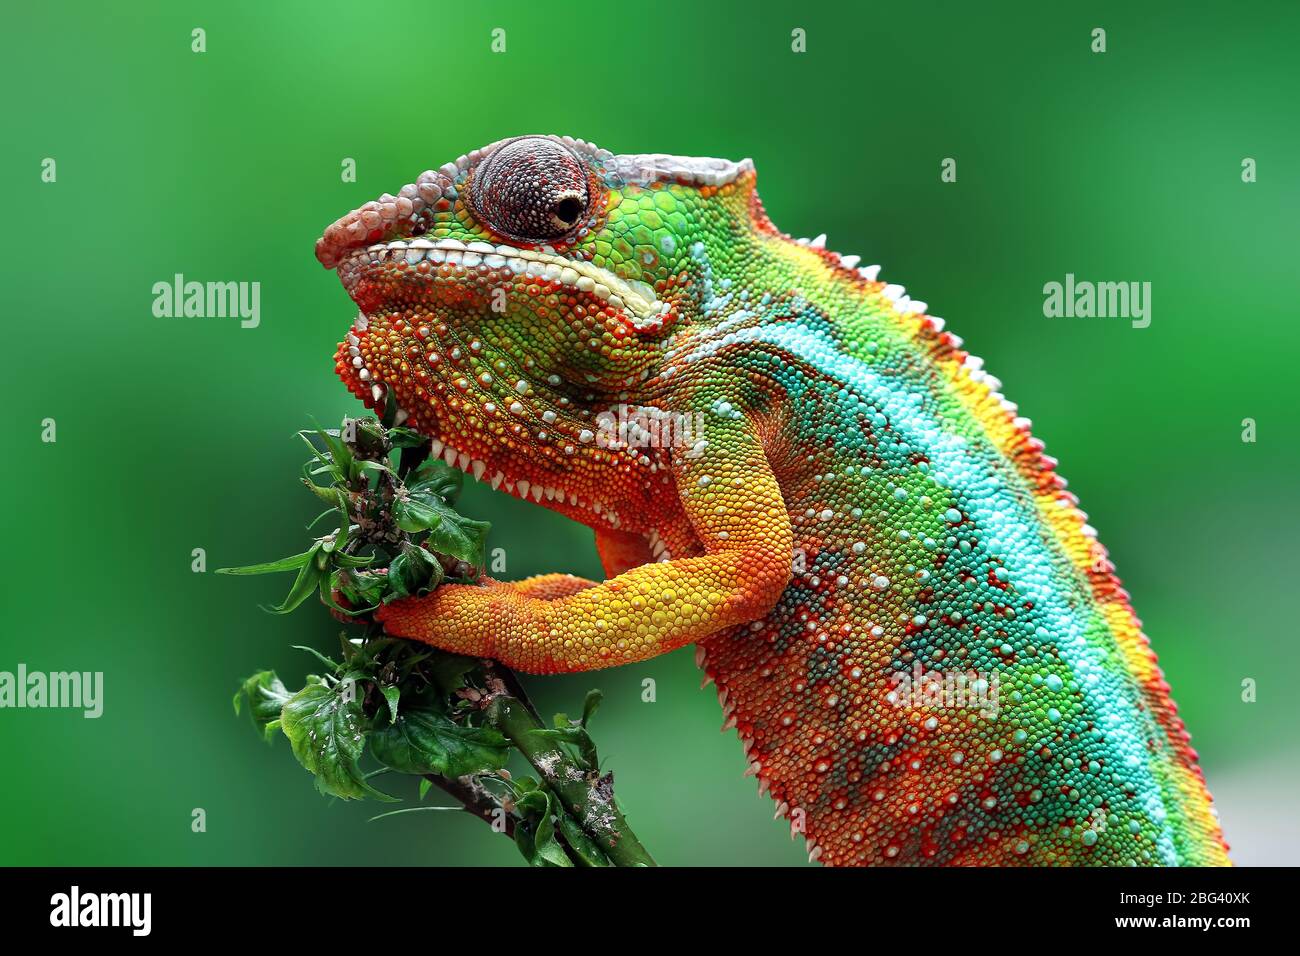 Panther chameleon on a plant, Indonesia Stock Photo